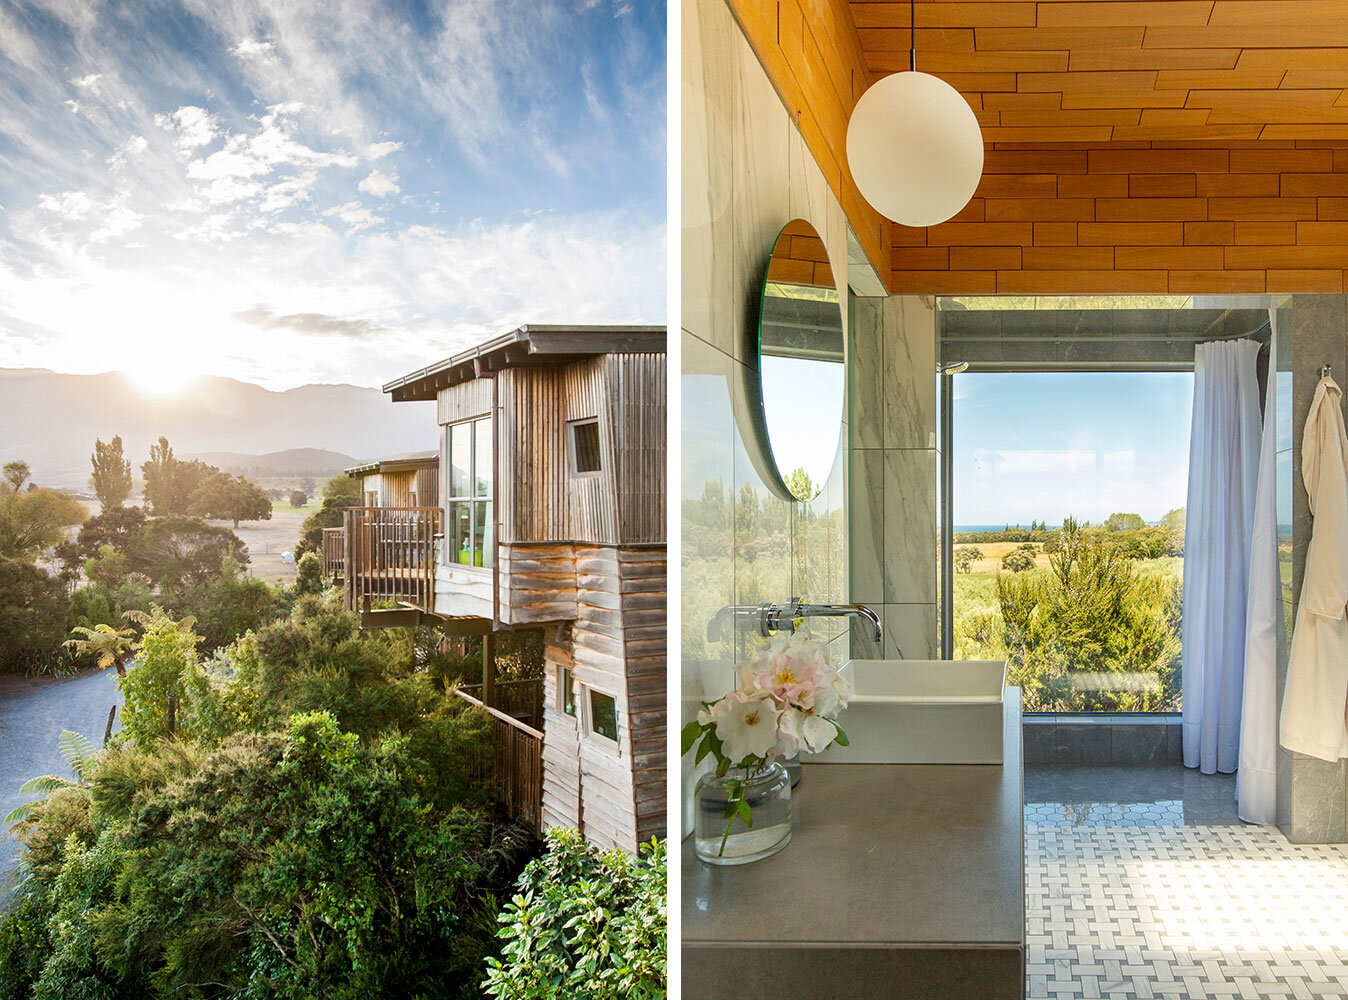 Both bedrooms of the Family Tree House have ocean and mountain view decks.